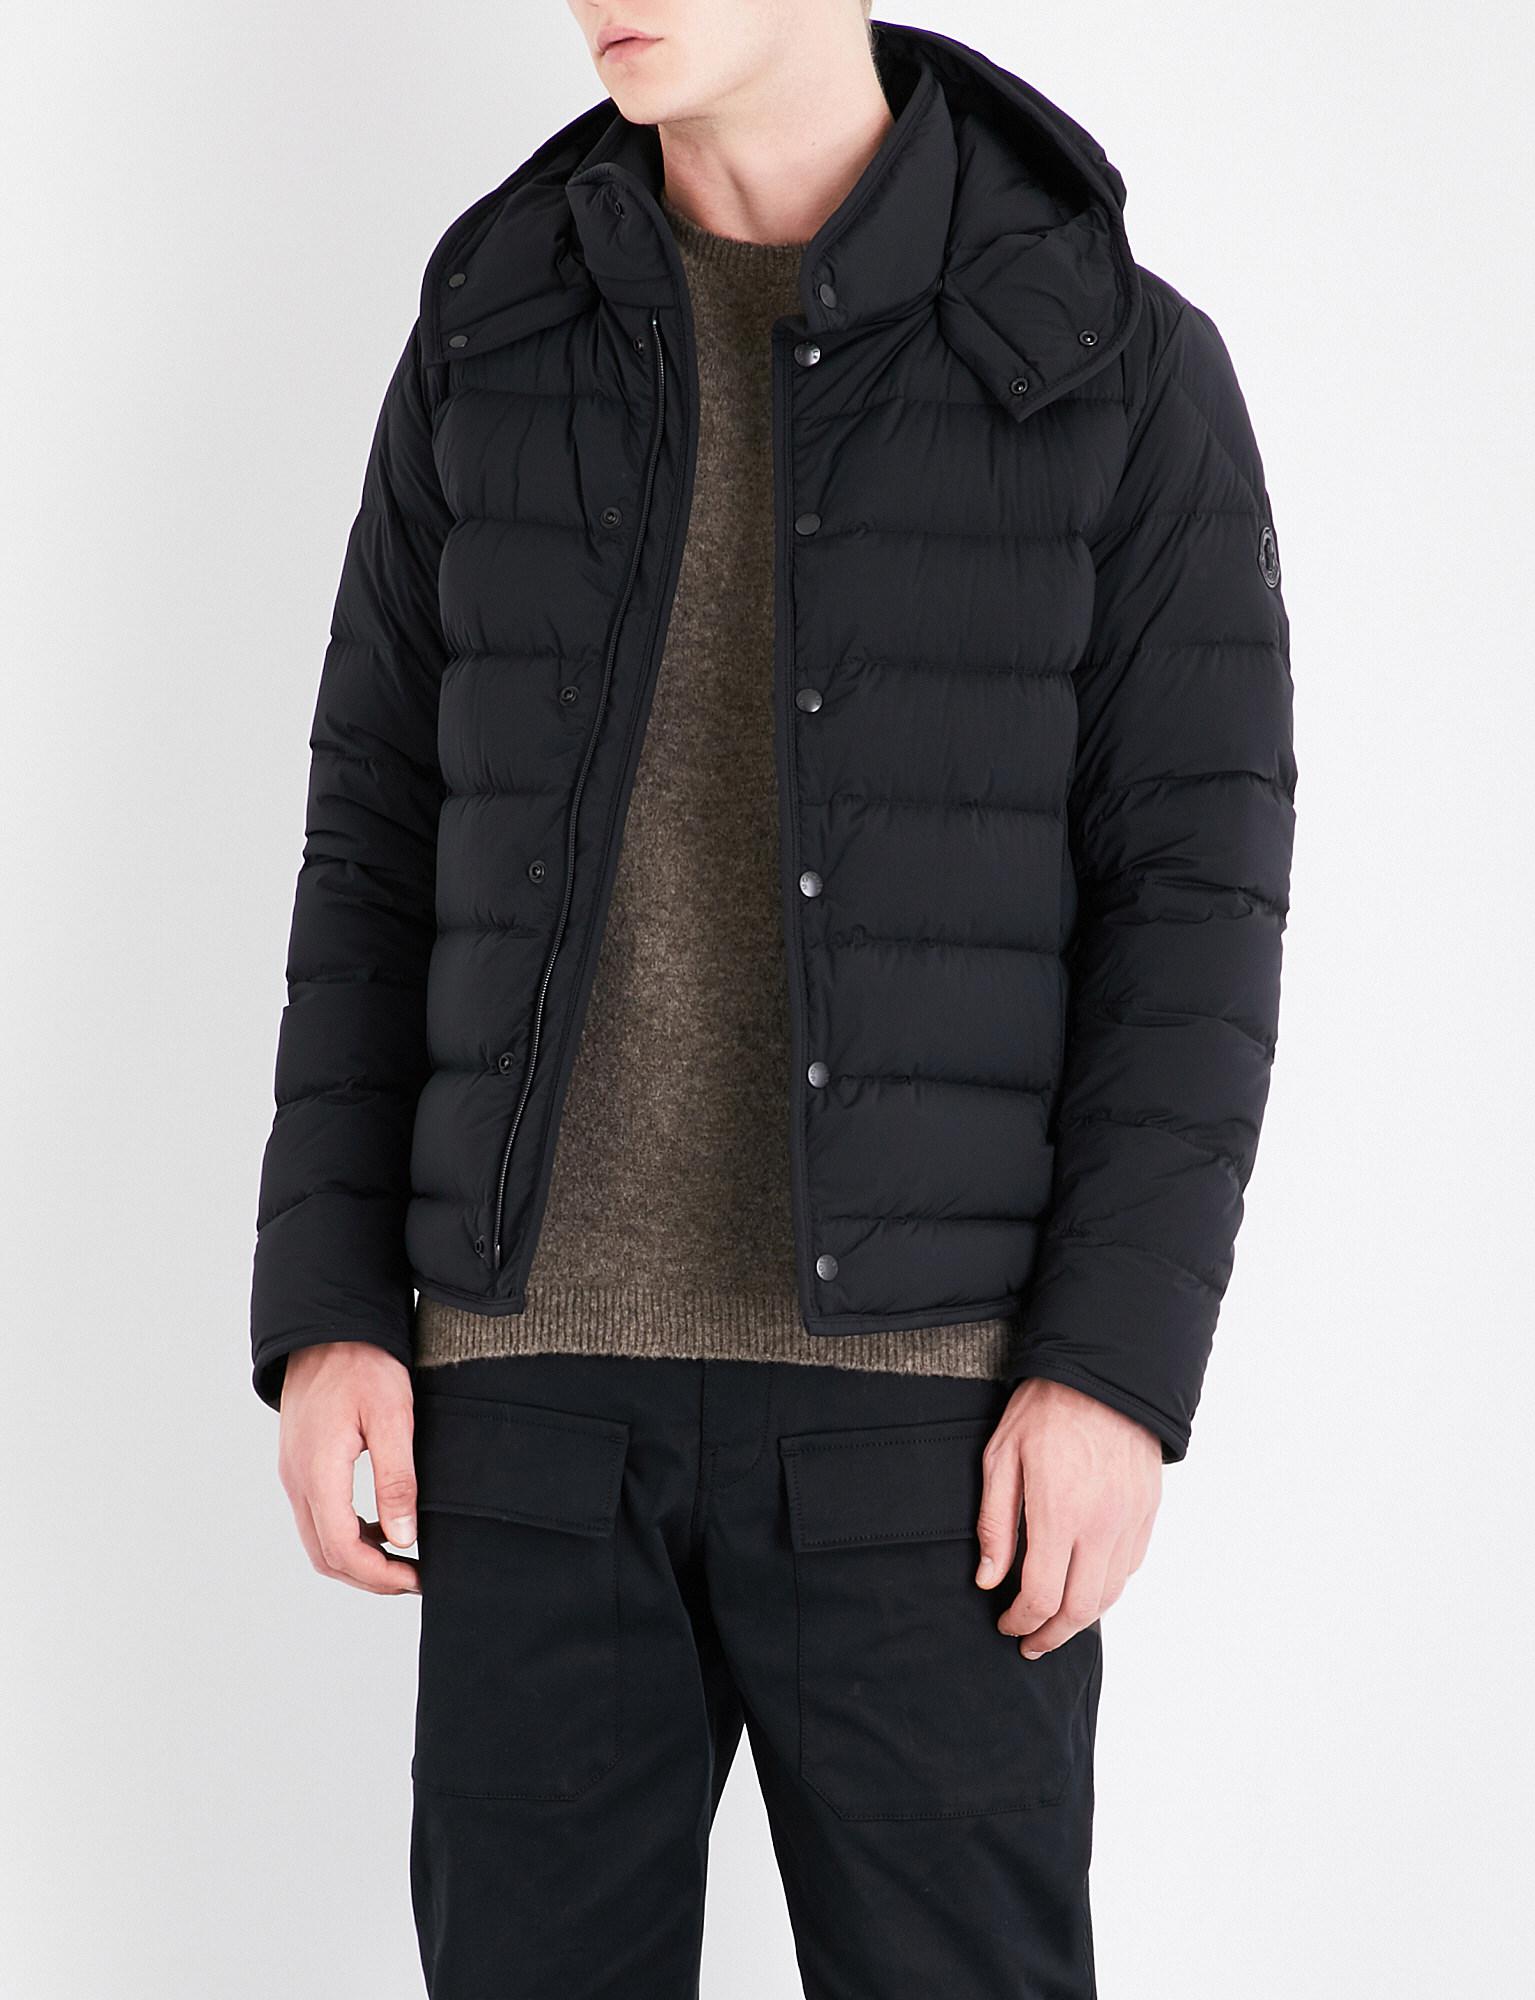 moncler nazaire black OFF 67% - Online Shopping Site for Fashion &  Lifestyle.